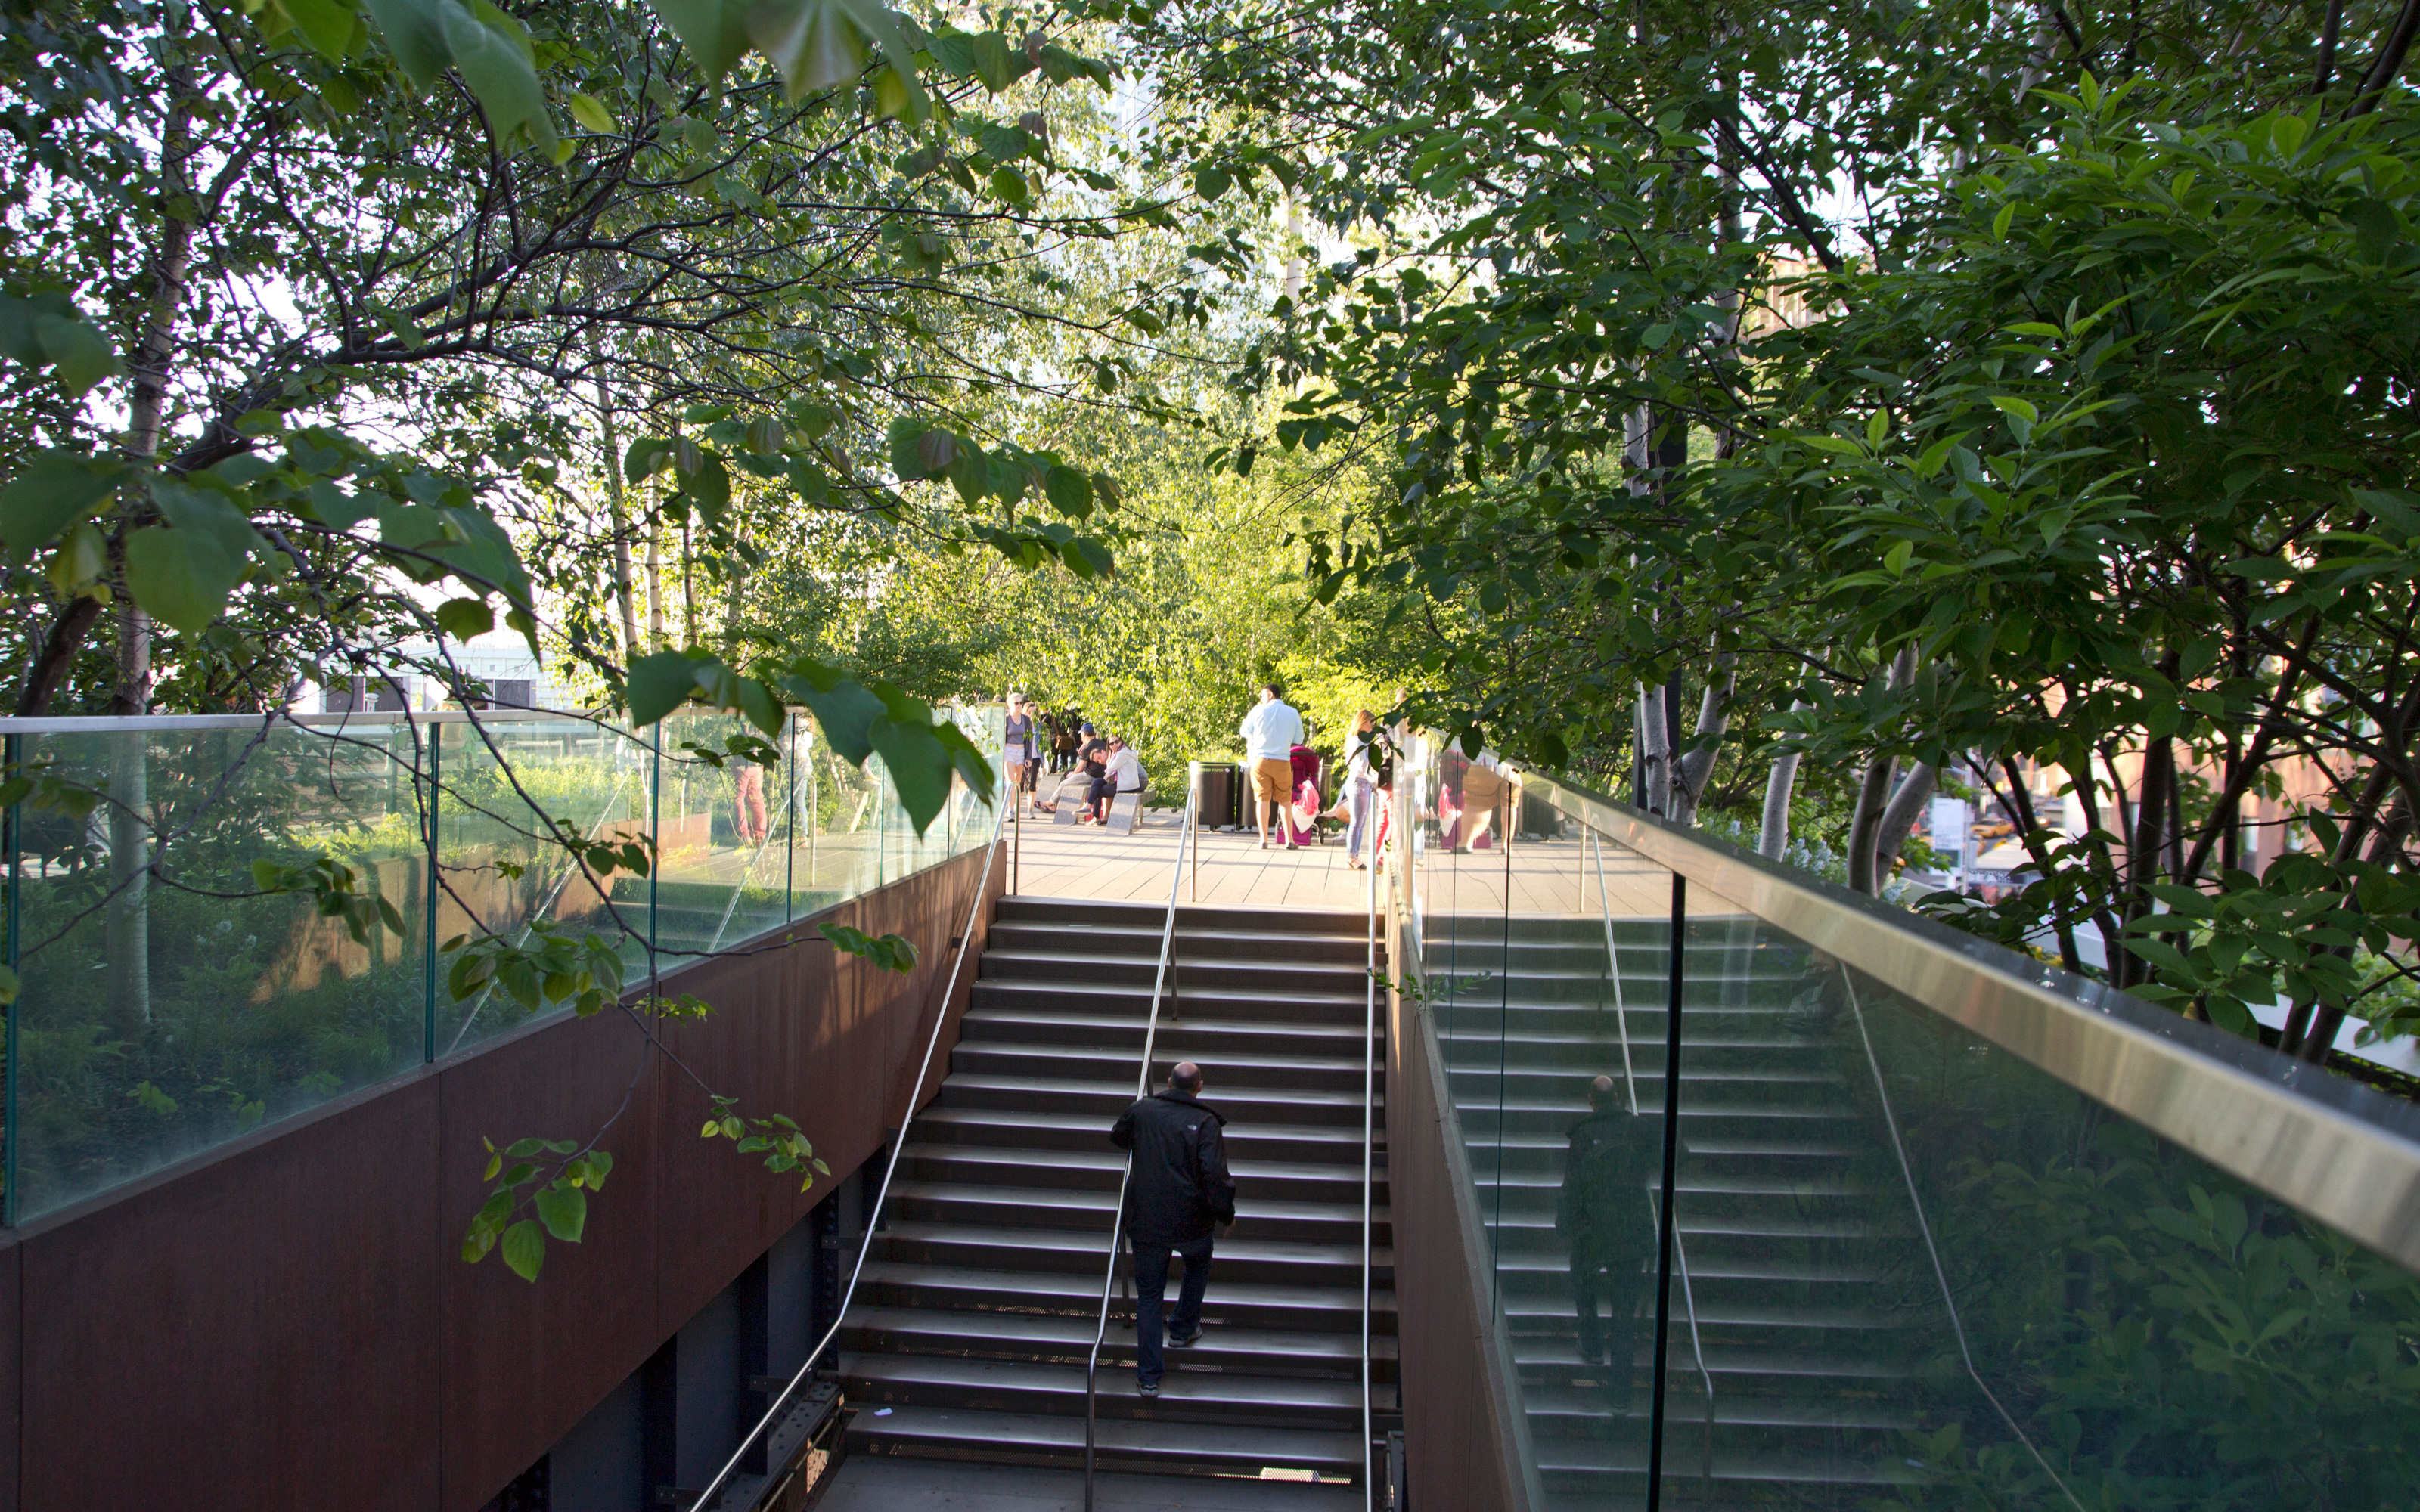 Staircases leading up to the High Line